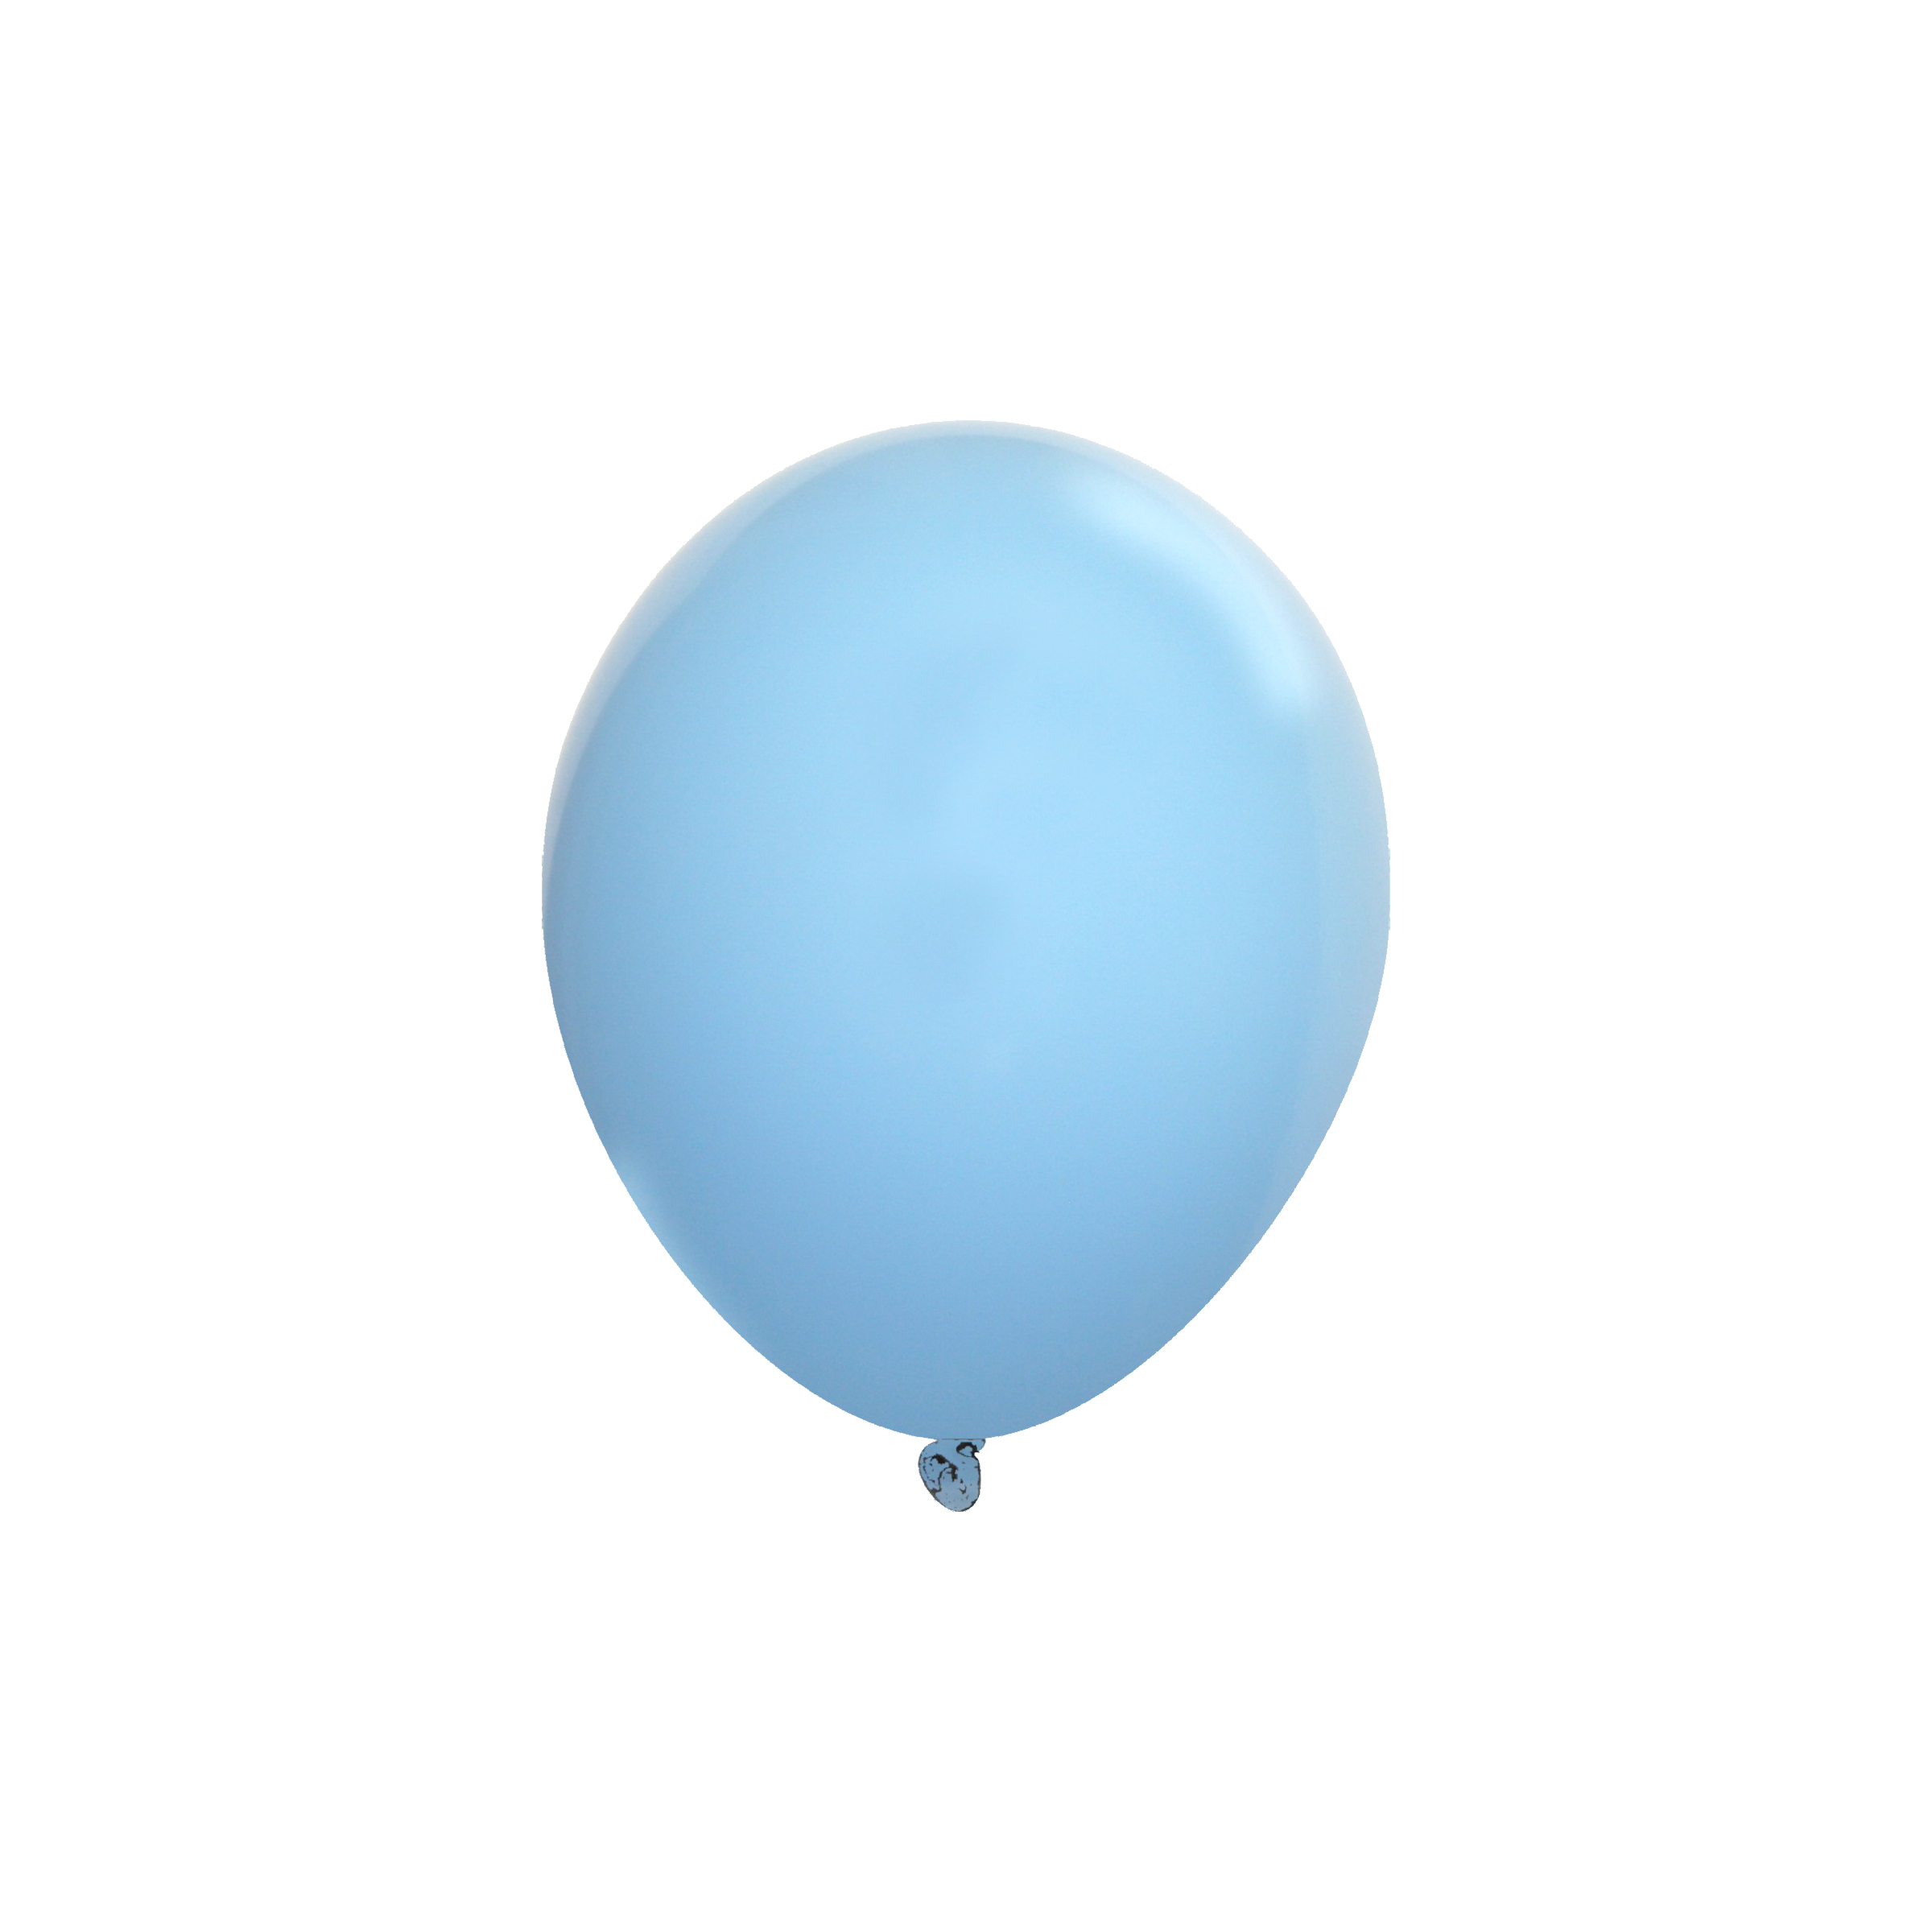 12 INCH BABY BLUE LATEX BALLOONS | BUY WHOLESALE BALLOONS